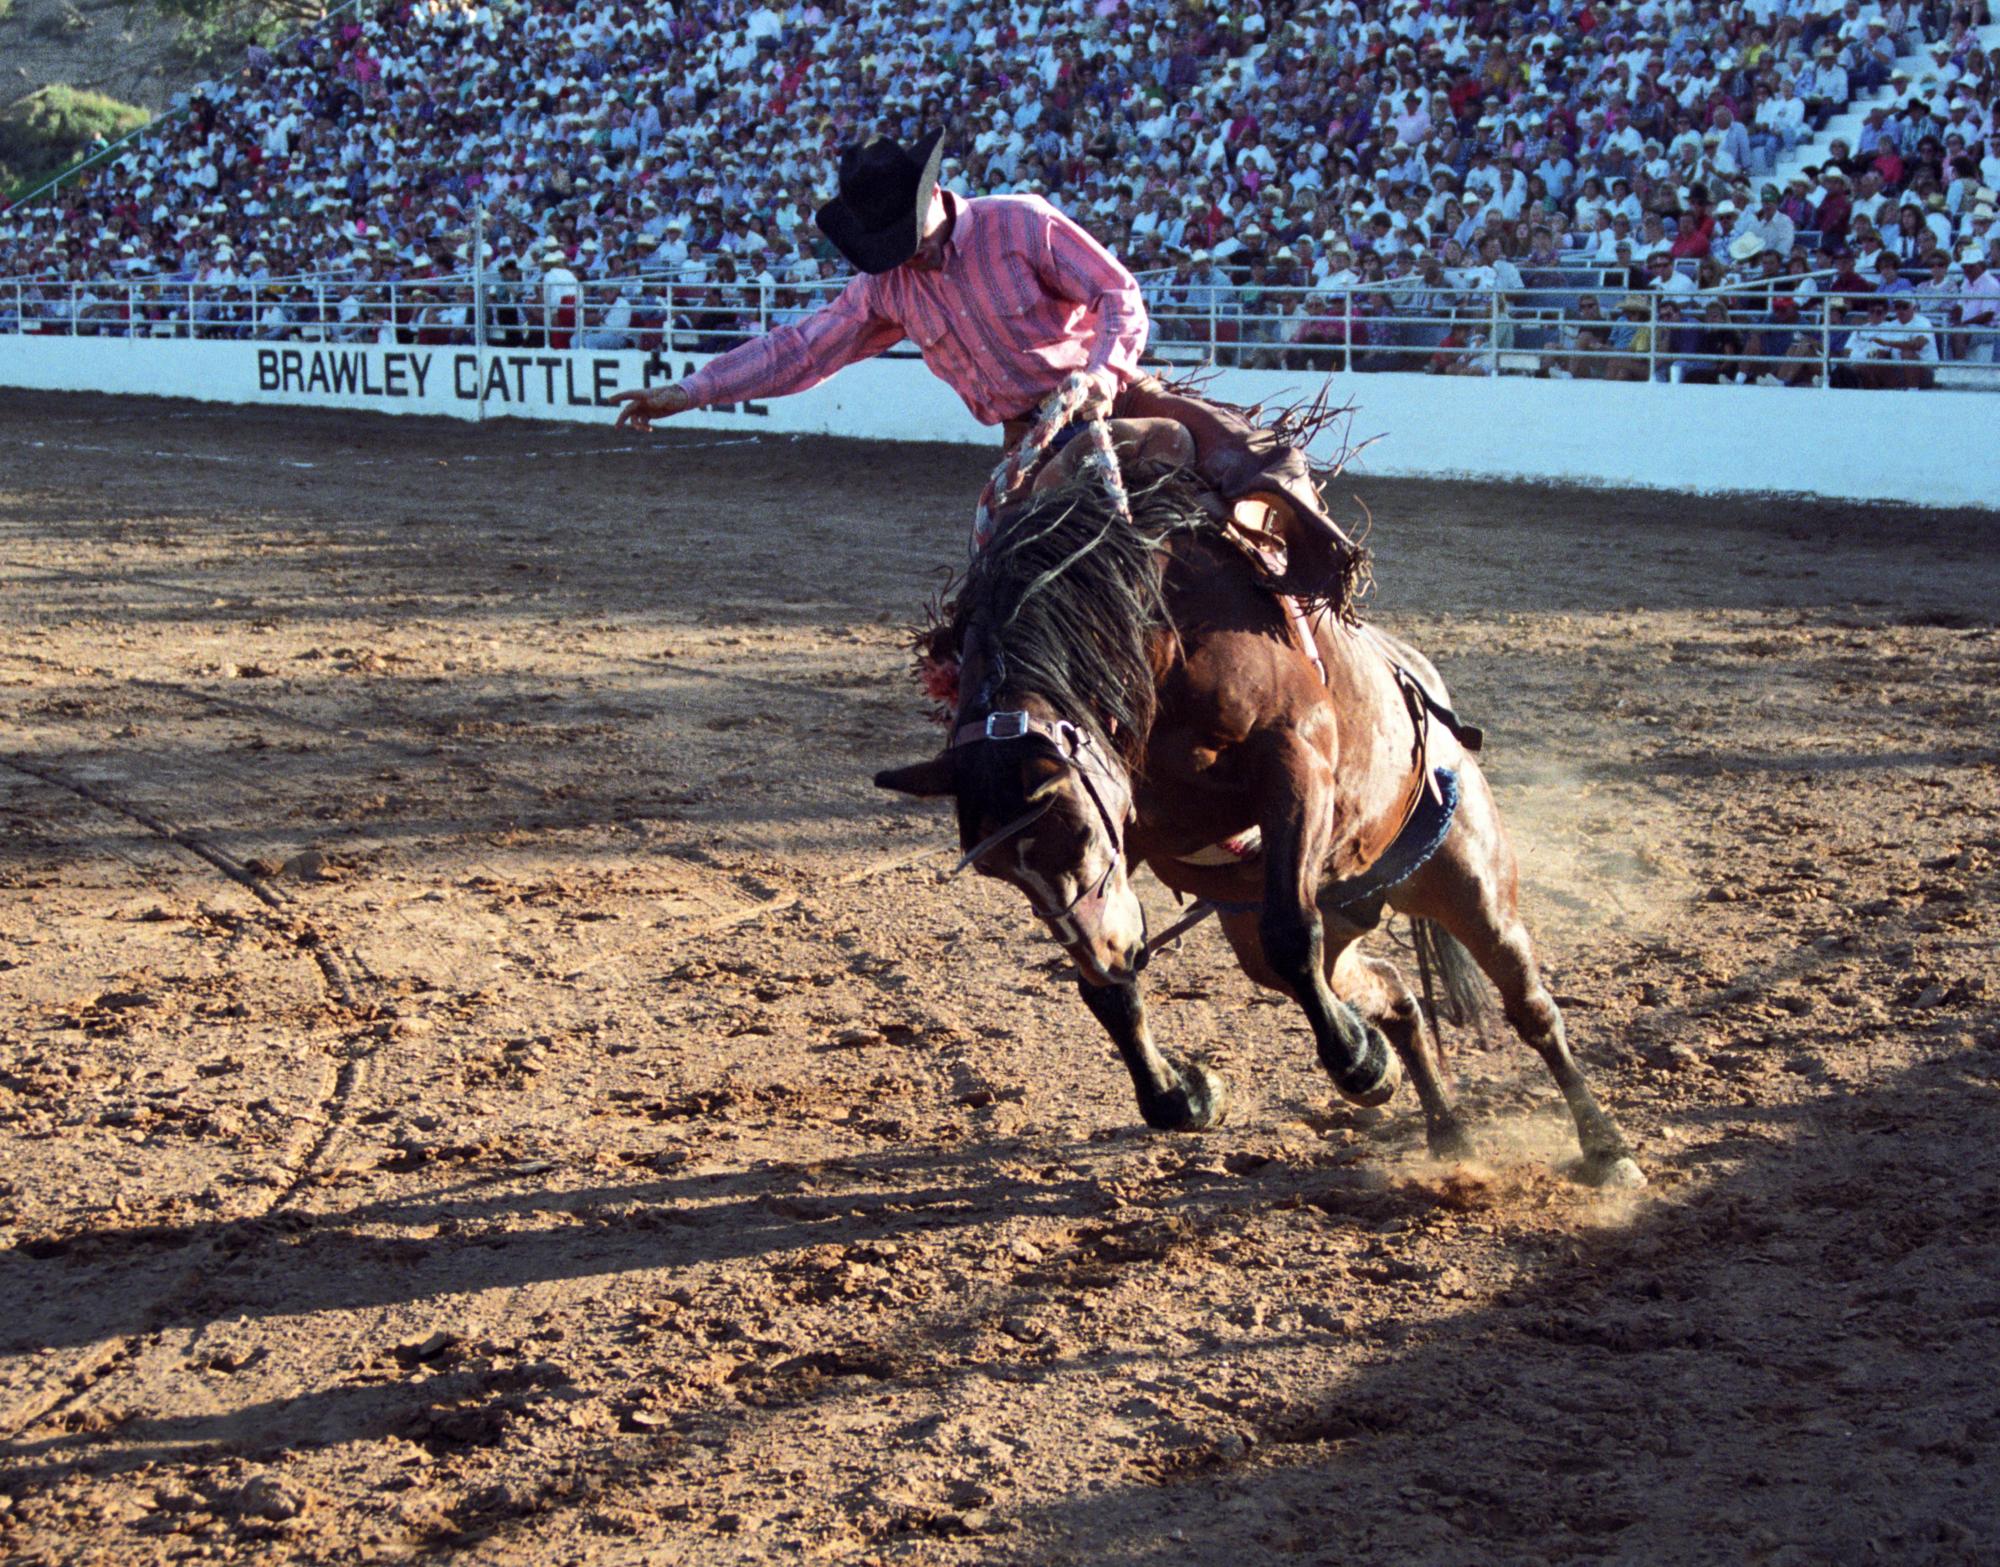 Imperial Valley Rodeo (1992) - Saddle Bronc #19